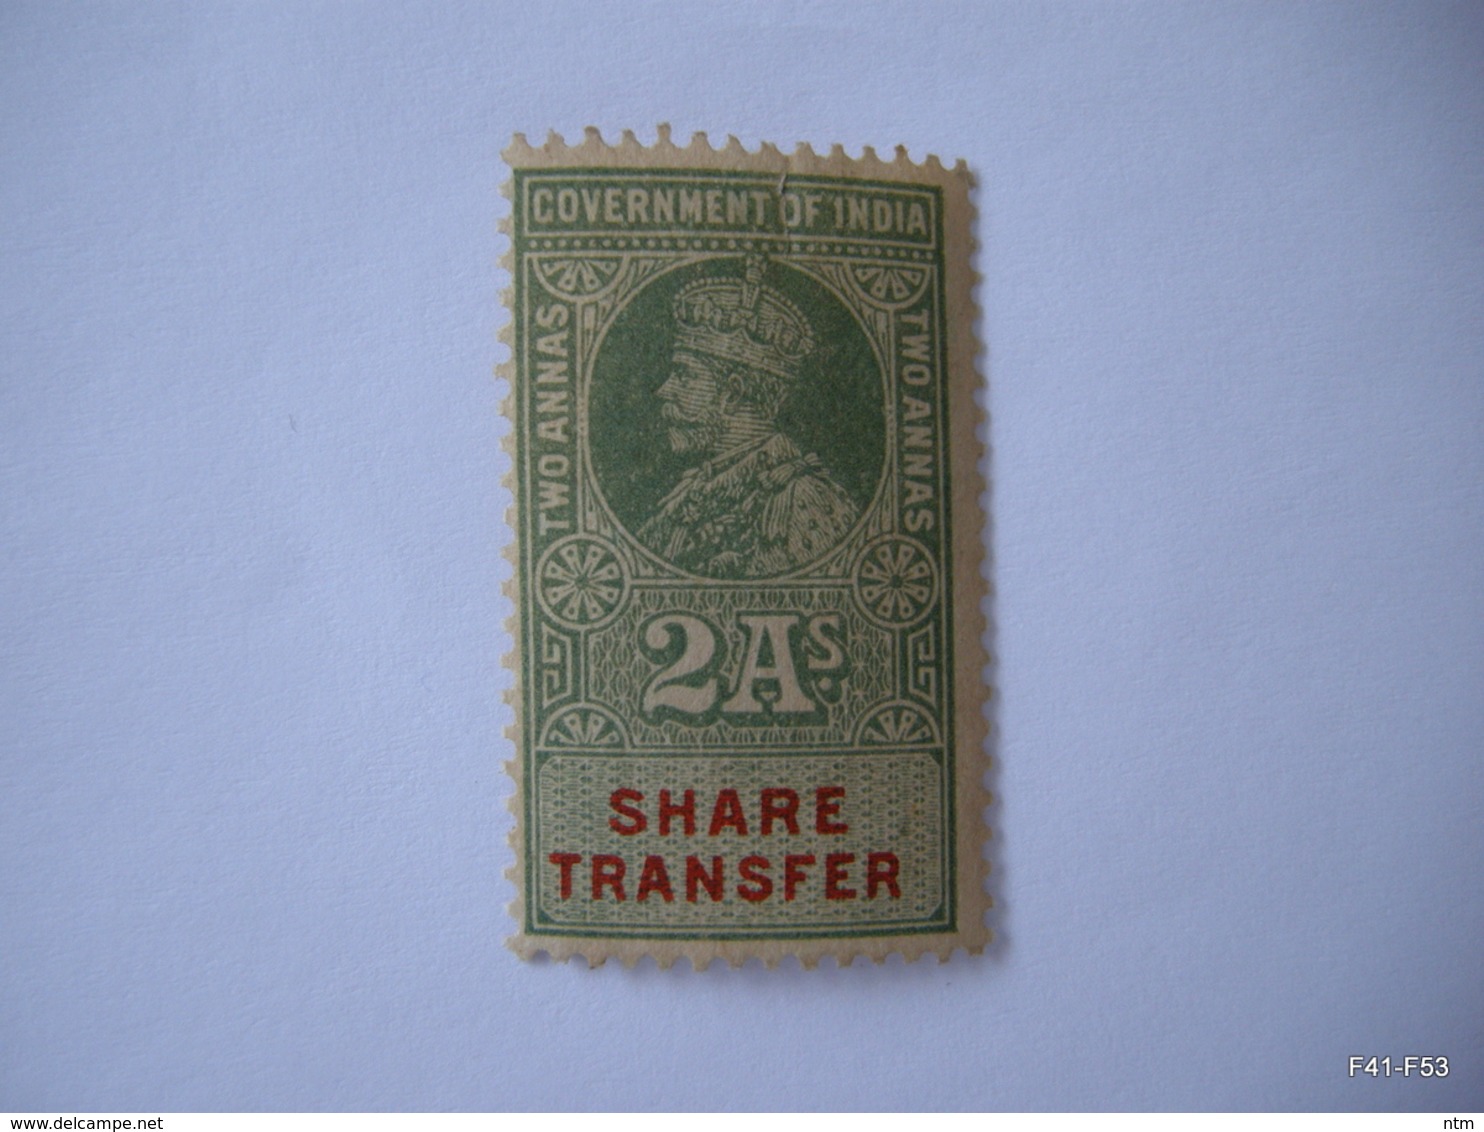 INDIA King George V. Share Transfer Stamp - Government Of India. 2As. Disturbed Gum. - 1911-35 King George V